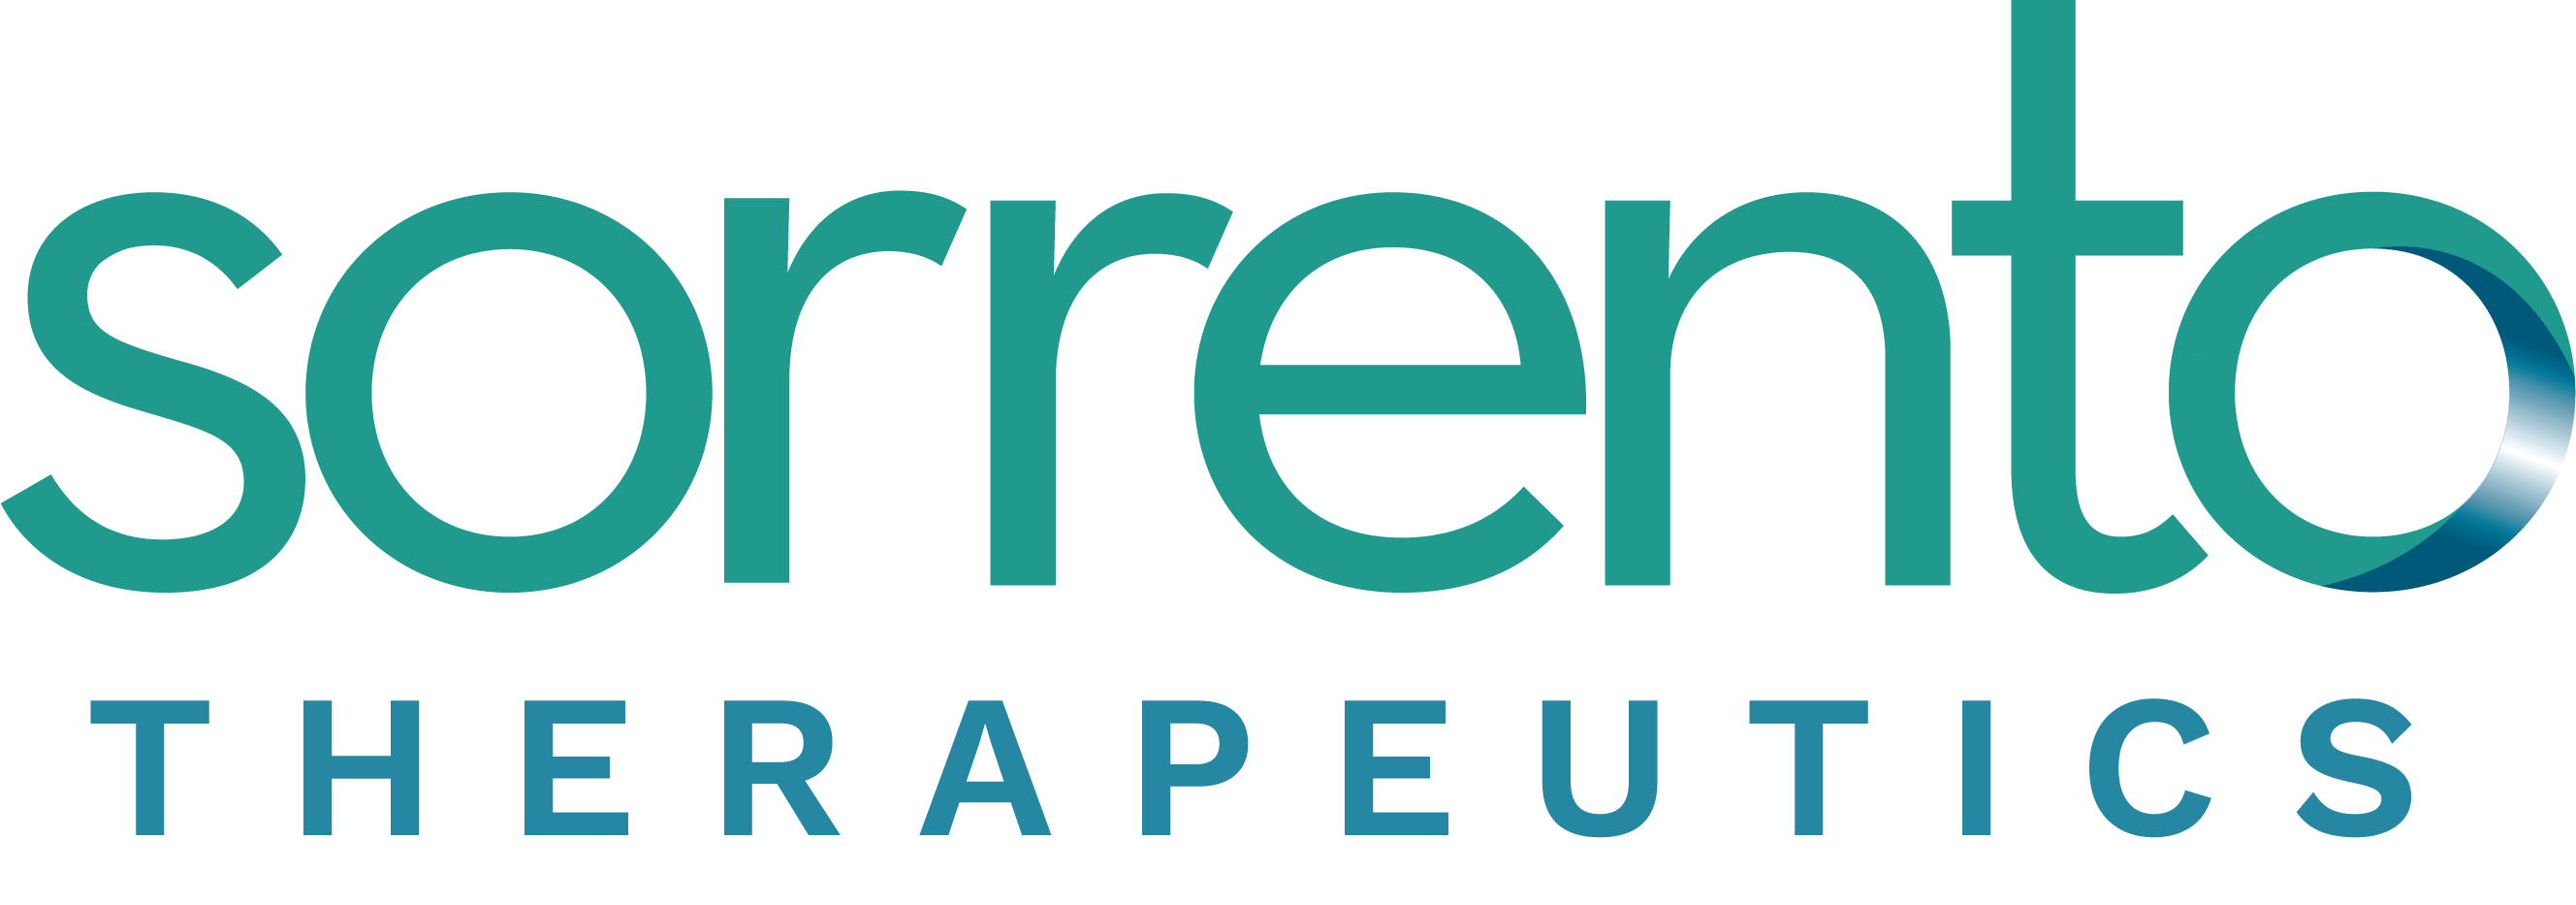 Sorrento Therapeutics Completes Enrollment of Phase 2 Clinical Trial of Resiniferatoxin (RTX) for Treatment of Knee Pain in Moderate to Severe Osteoarthritis of the Knee (OAK) Patients